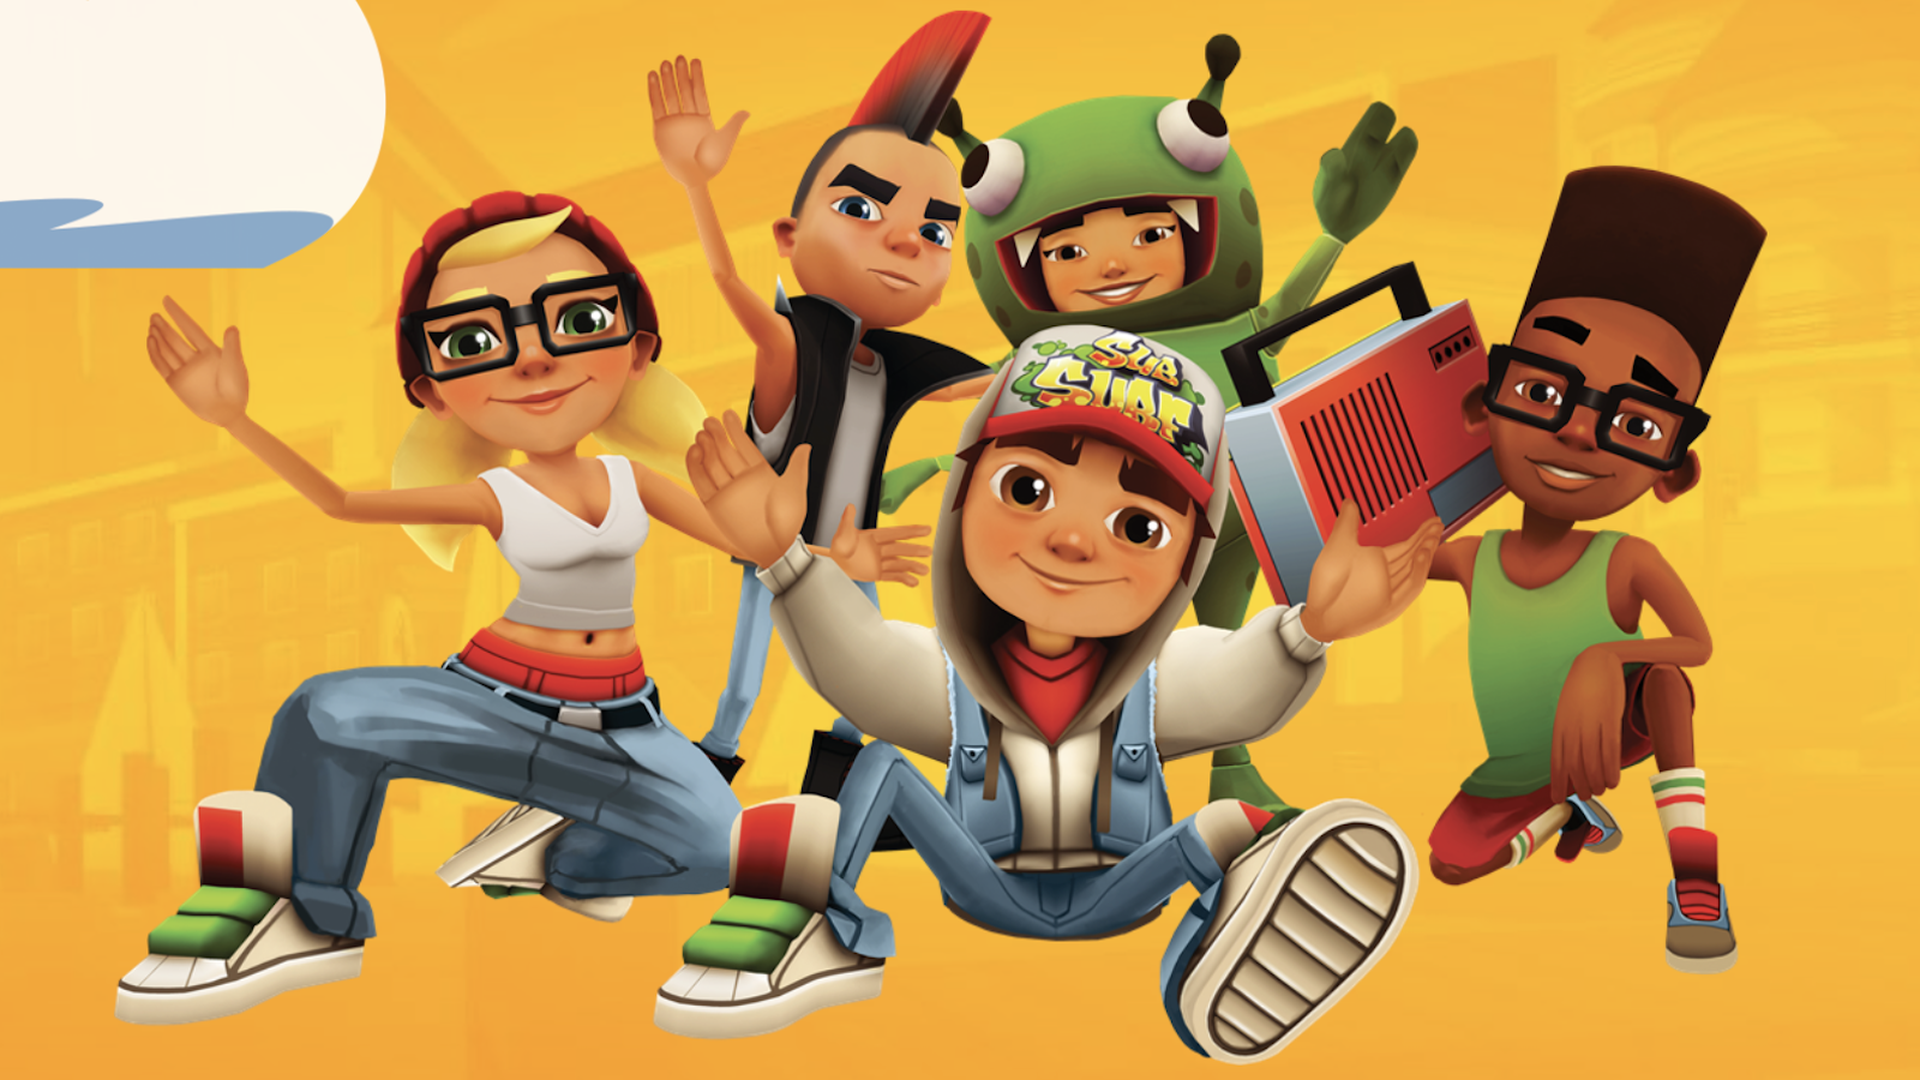 Why Subway Surfers is so Popular?